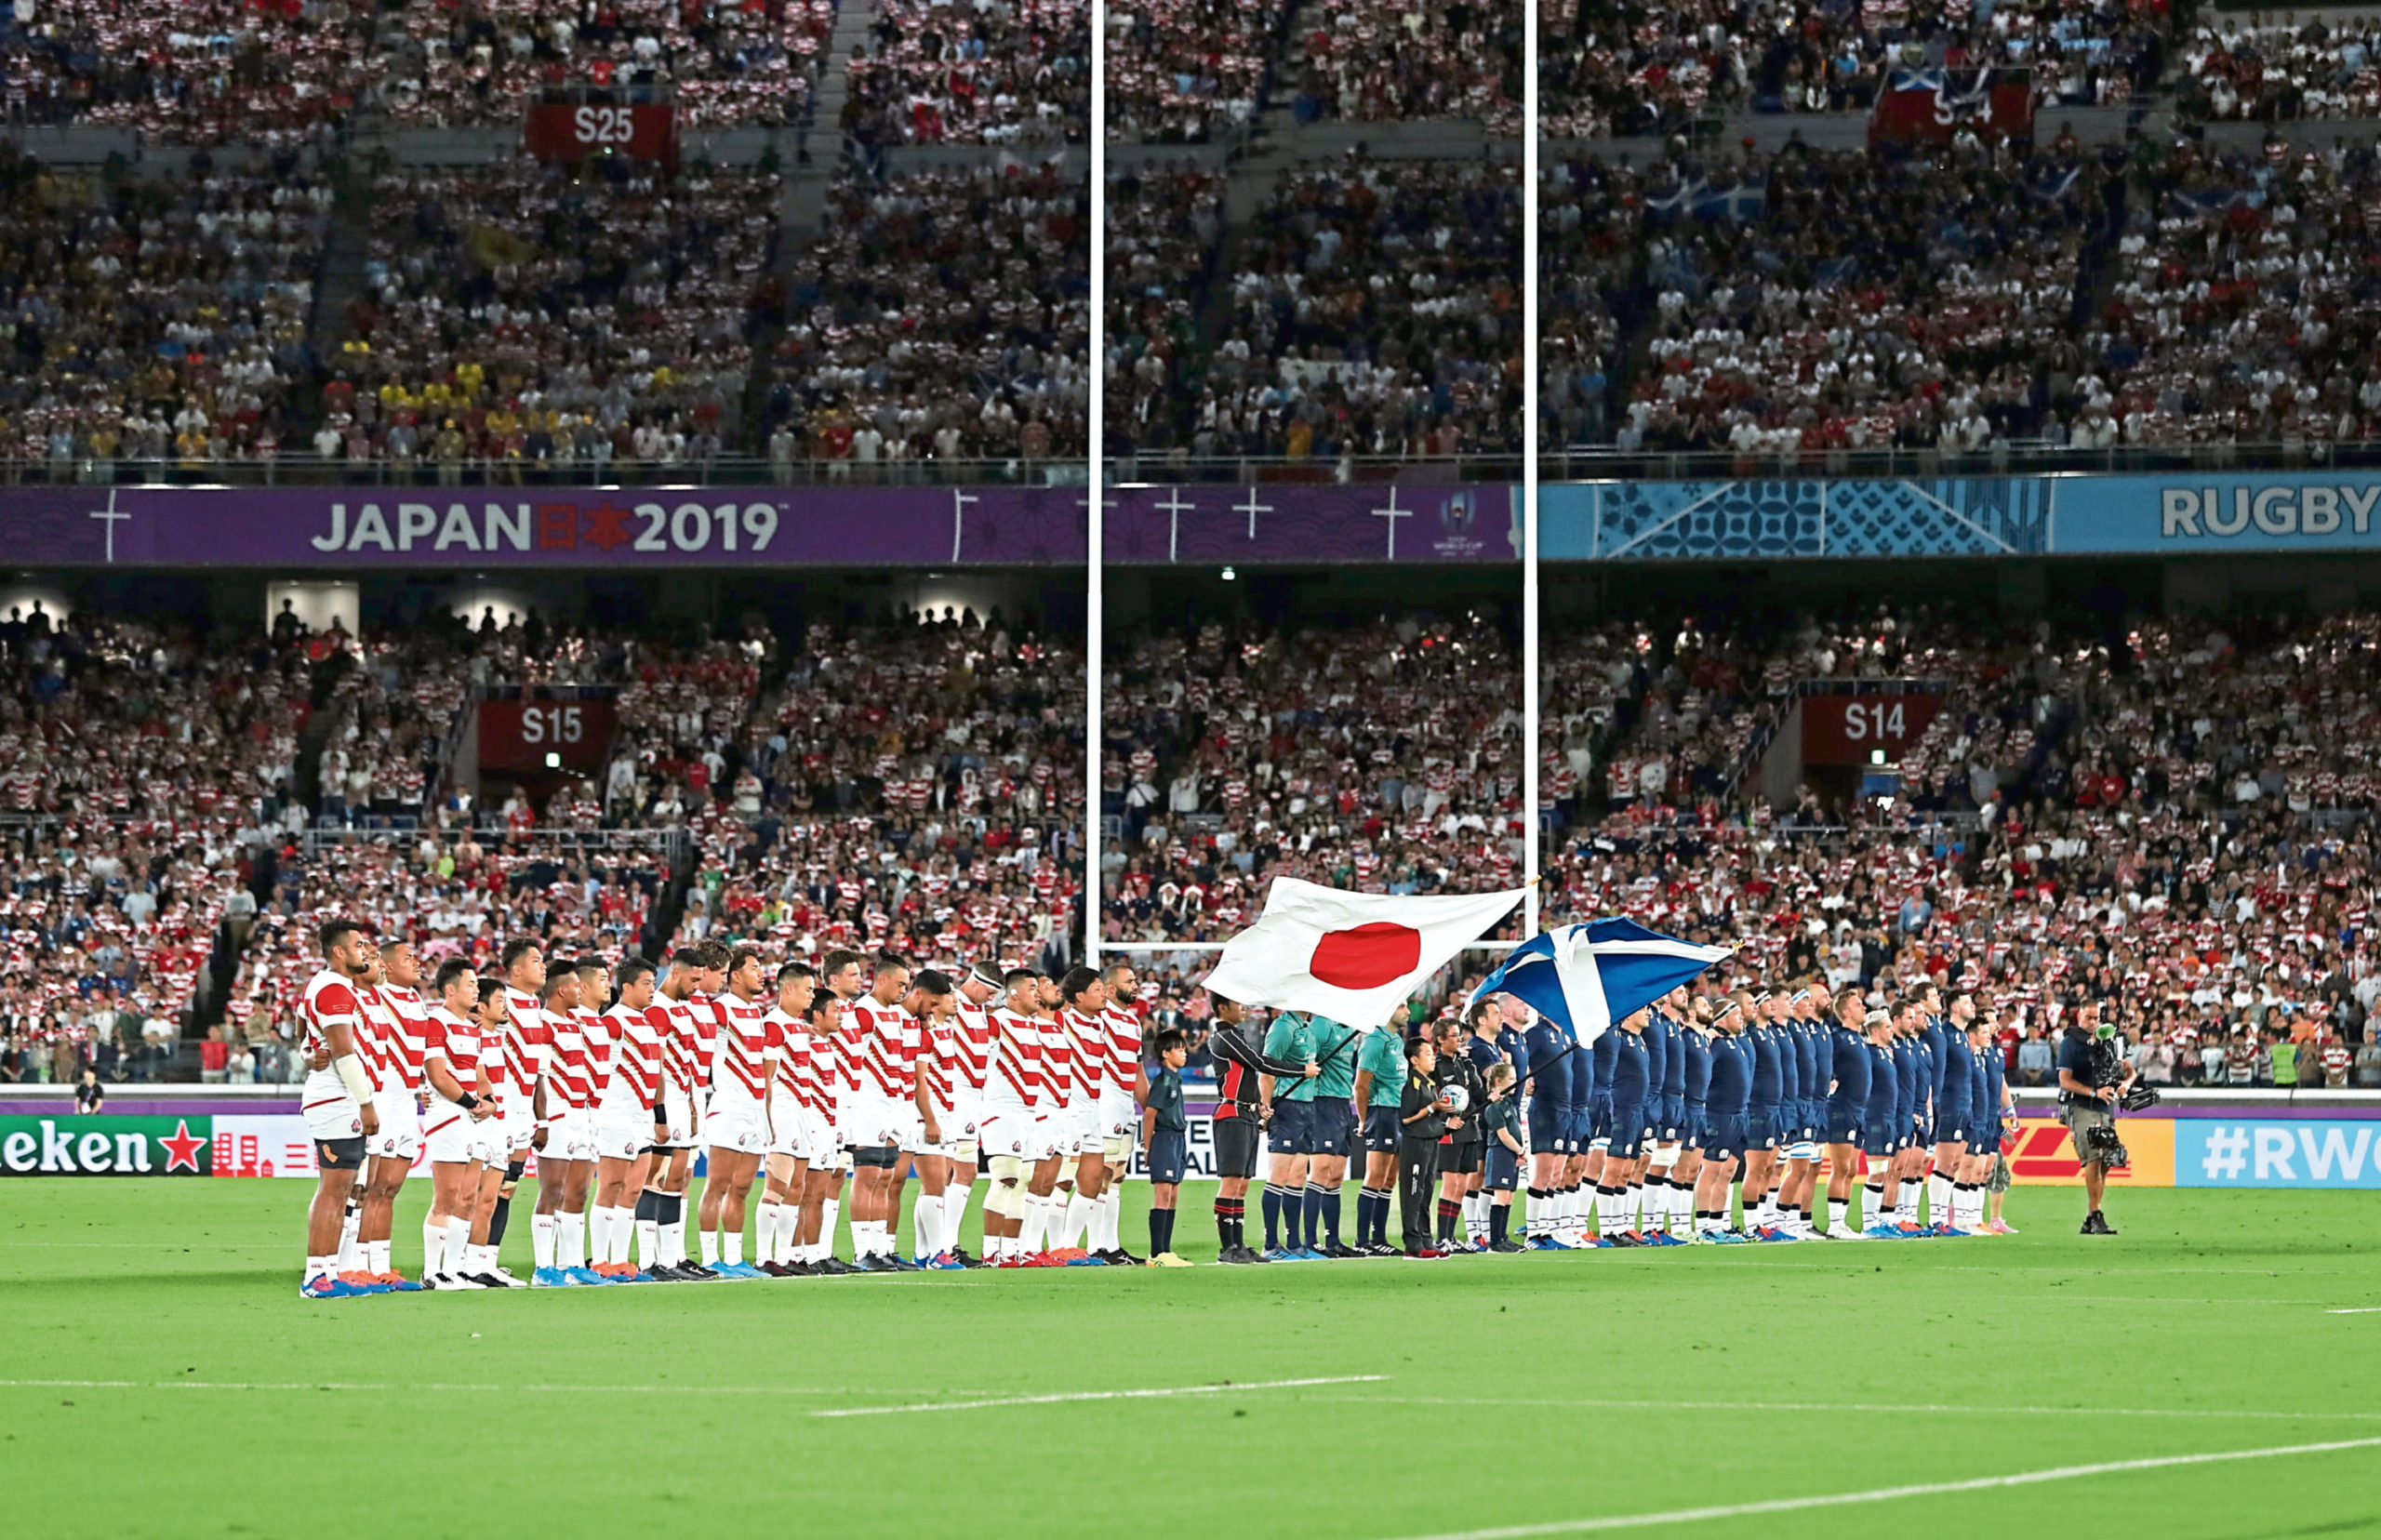 Japan and Scotland observe a minutes silence for the victims of Typhoon Hagibis during the 2019 Rugby World Cup match at the Yokohama Stadium, Yokohama. PA Photo. Picture date: Sunday October 13, 2019. See PA story RUGBYU Scotland. Photo credit should read: David Davies/PA Wire. RESTRICTIONS: Editorial use only. Strictly no commercial use or association. Still image use only. Use implies acceptance of RWC 2019 T&Cs (in particular Section 5 of RWC 2019 T&Cs) at URL: bit.ly/2knOId6